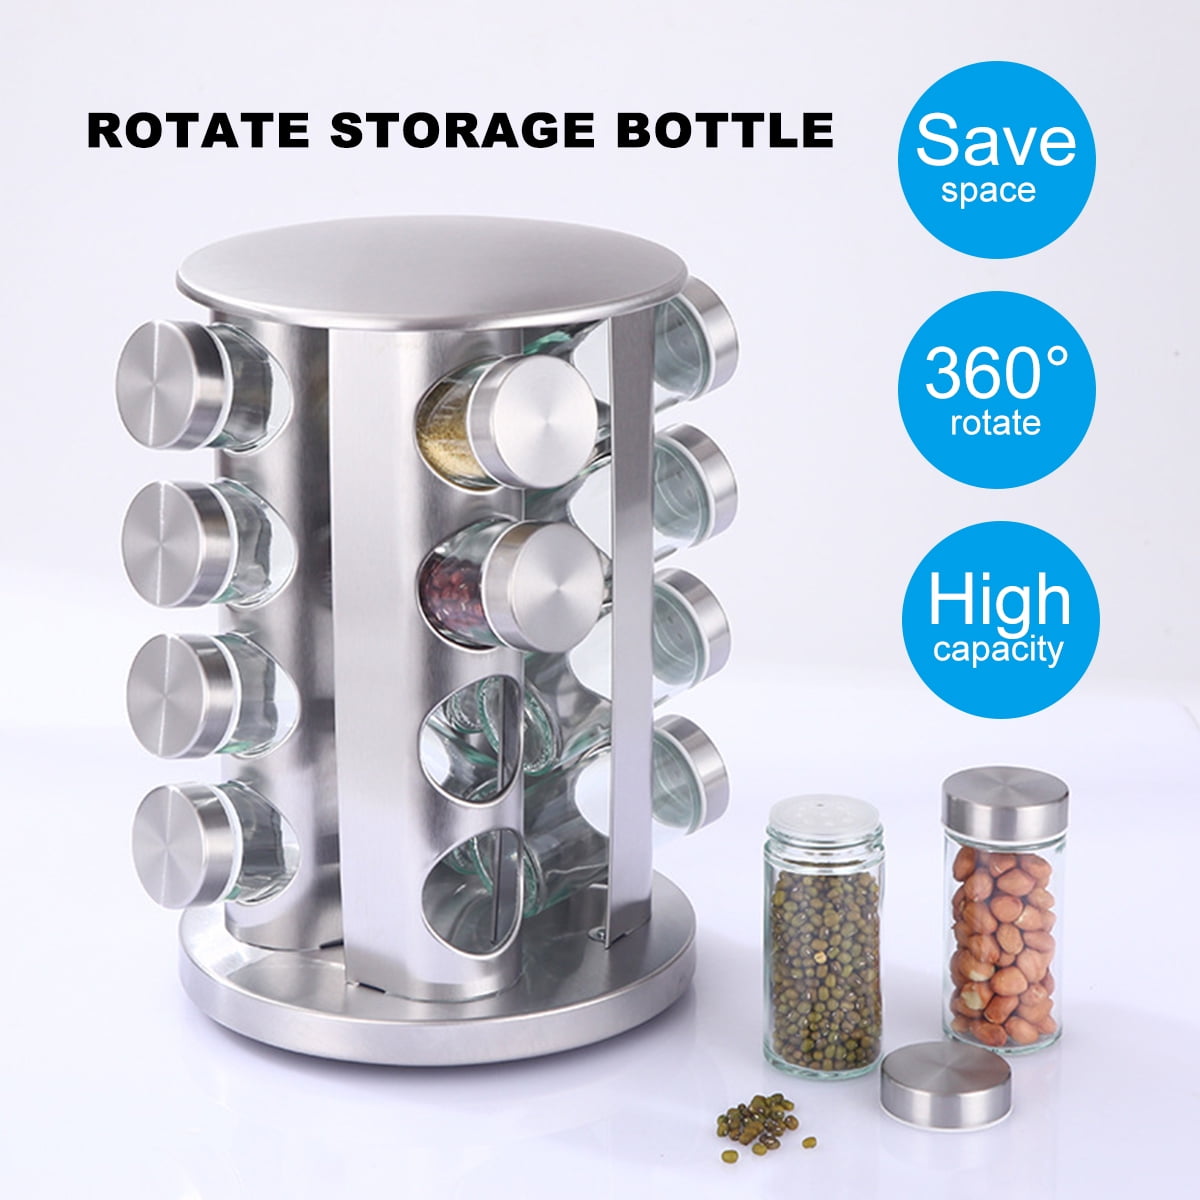 1set Revolving Spice Rack, 6-Jar Seasoning Organizer Holder 360° Rotation  Shelf Tower Set with 6 Glass Spice Refill Containers Jars for Cabinet